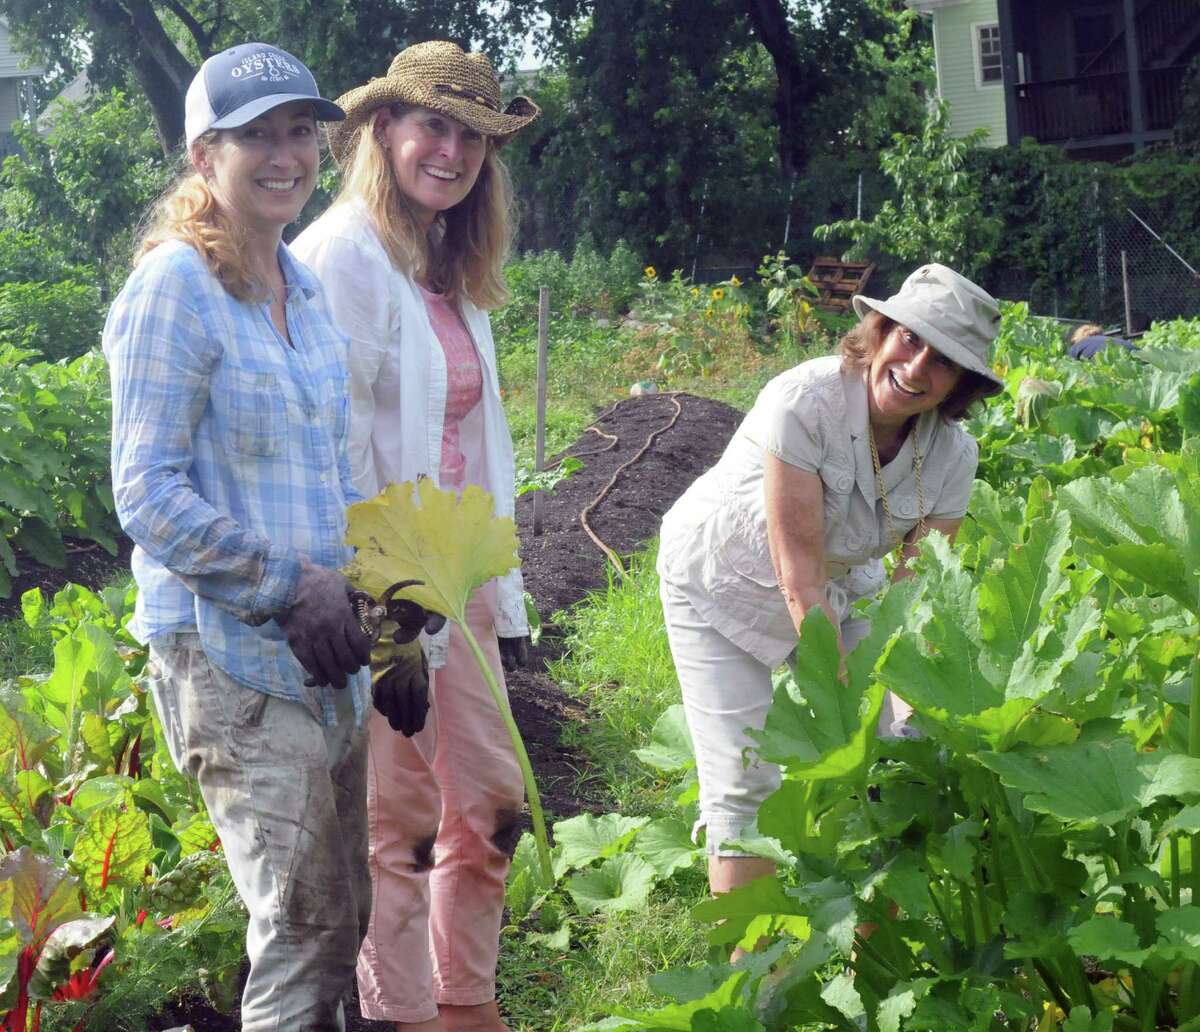 Shana Hurkala, Tara Dolman and Ann Gilmartin work at Fairgate Farm in Stamford, CT, on Monday, July 25, 2016, as part of the 30th anniversary celebration for Wings Unlimited, a meeting planning company in Darien.